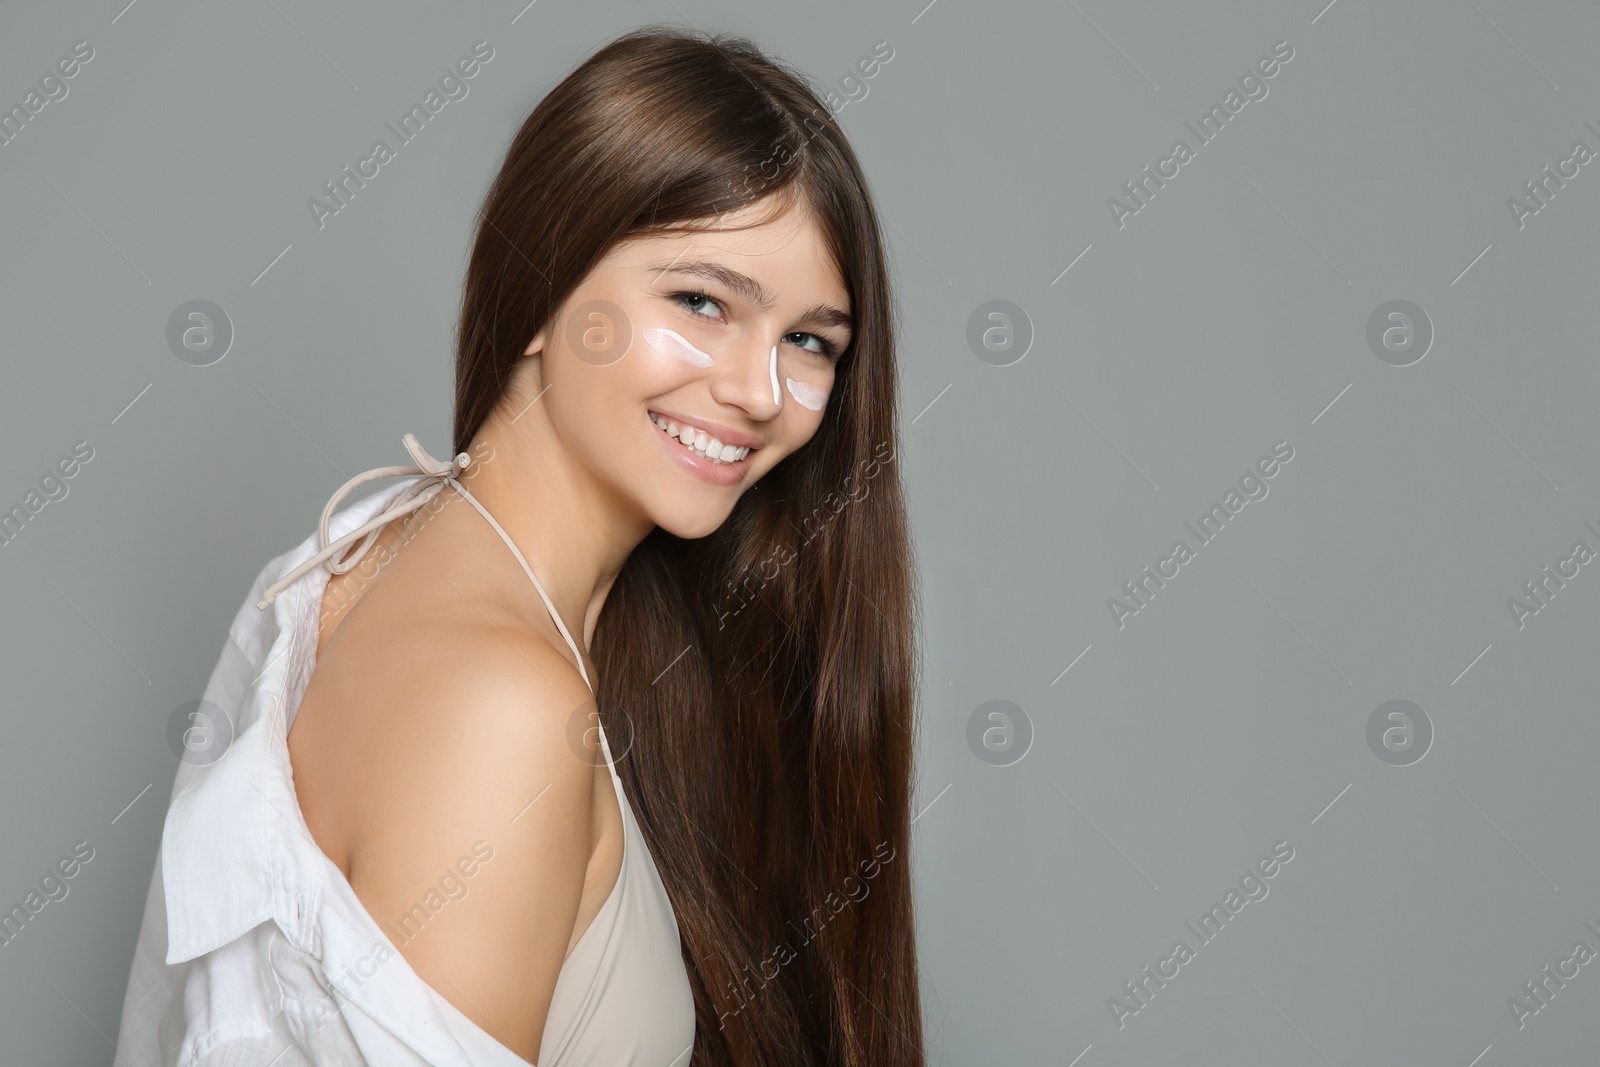 Photo of Teenage girl with sun protection cream on her face against grey background. Space for text